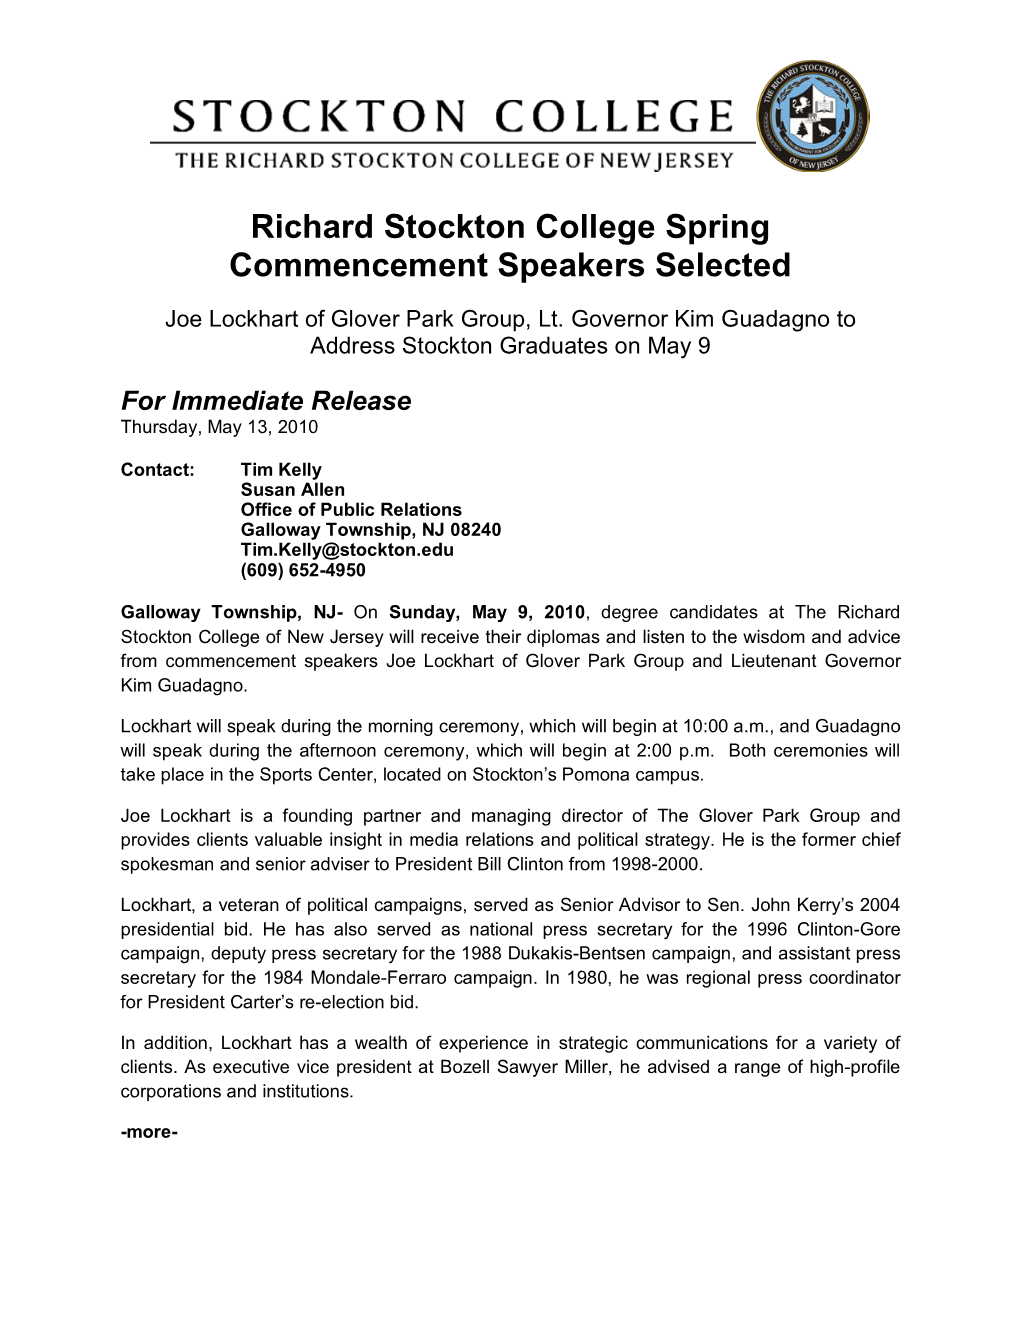 Richard Stockton College Spring Commencement Speakers Selected